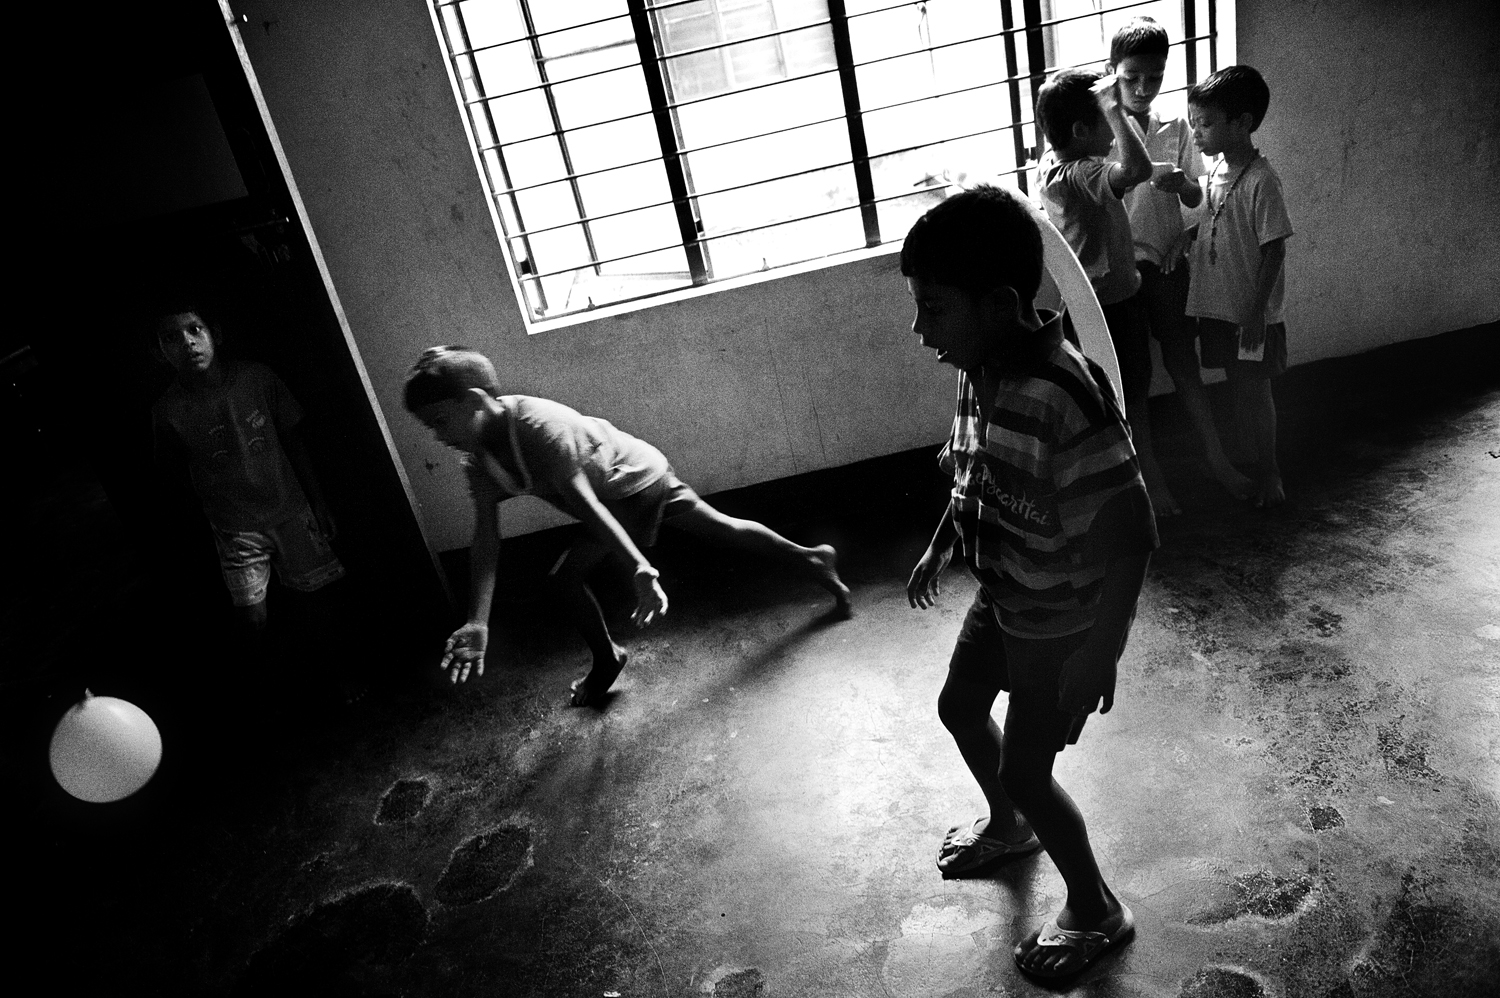 An orphanage in the city of Thodupuzha, Kerala. Every day 24 people and about 100 trying to take their lives in the state, which had created a high number of orphans.